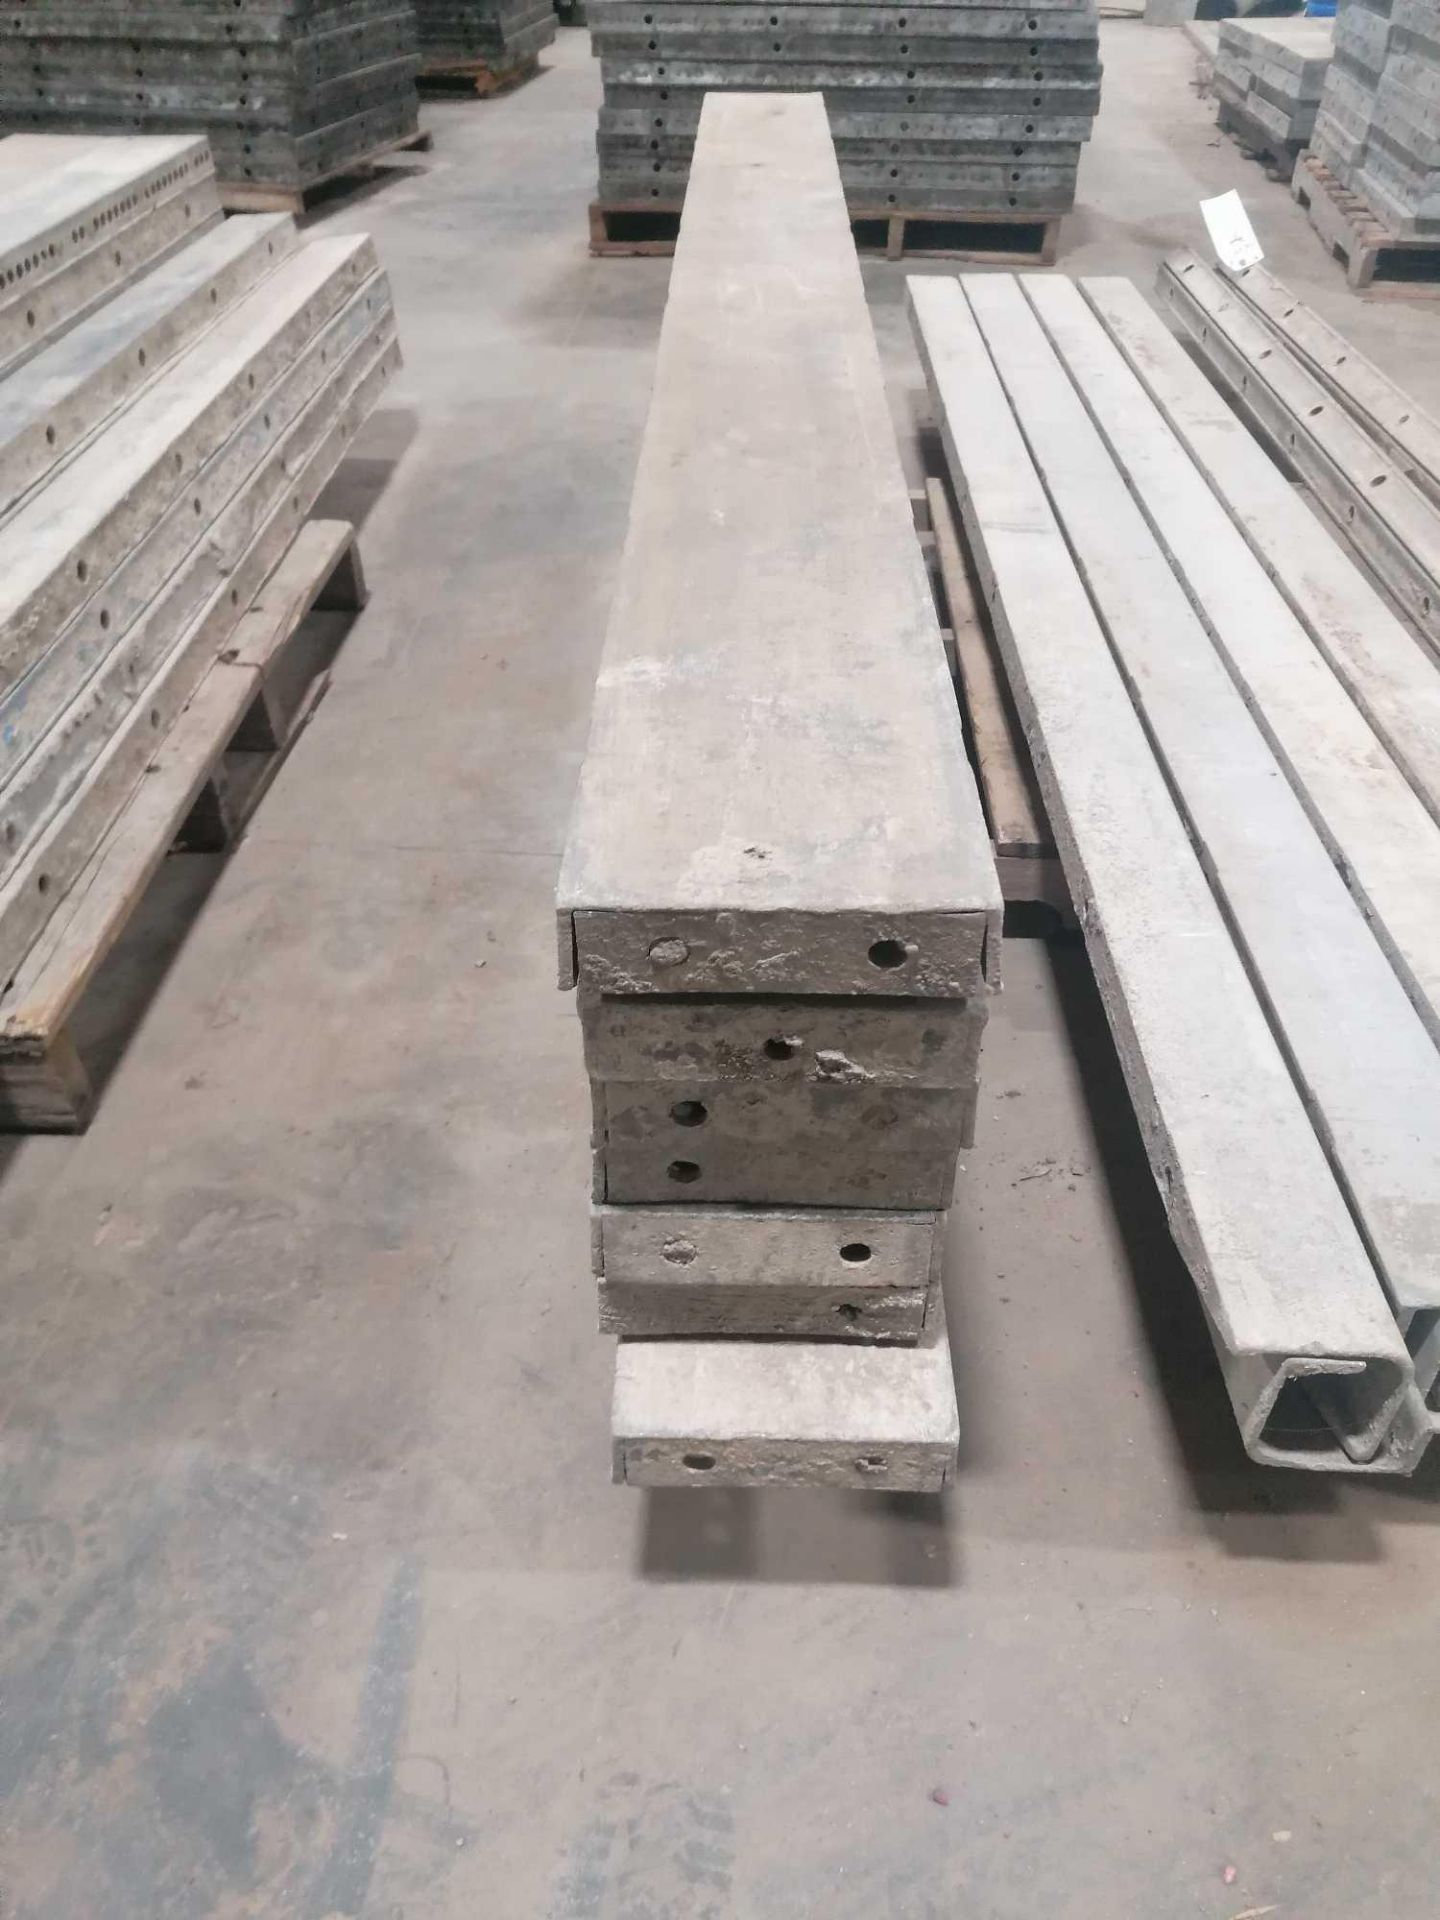 (7) 8" x 8' Jumps Western Aluminum Concrete Forms, Smooth 6-12 Hole Pattern. Located at 119 Spruce